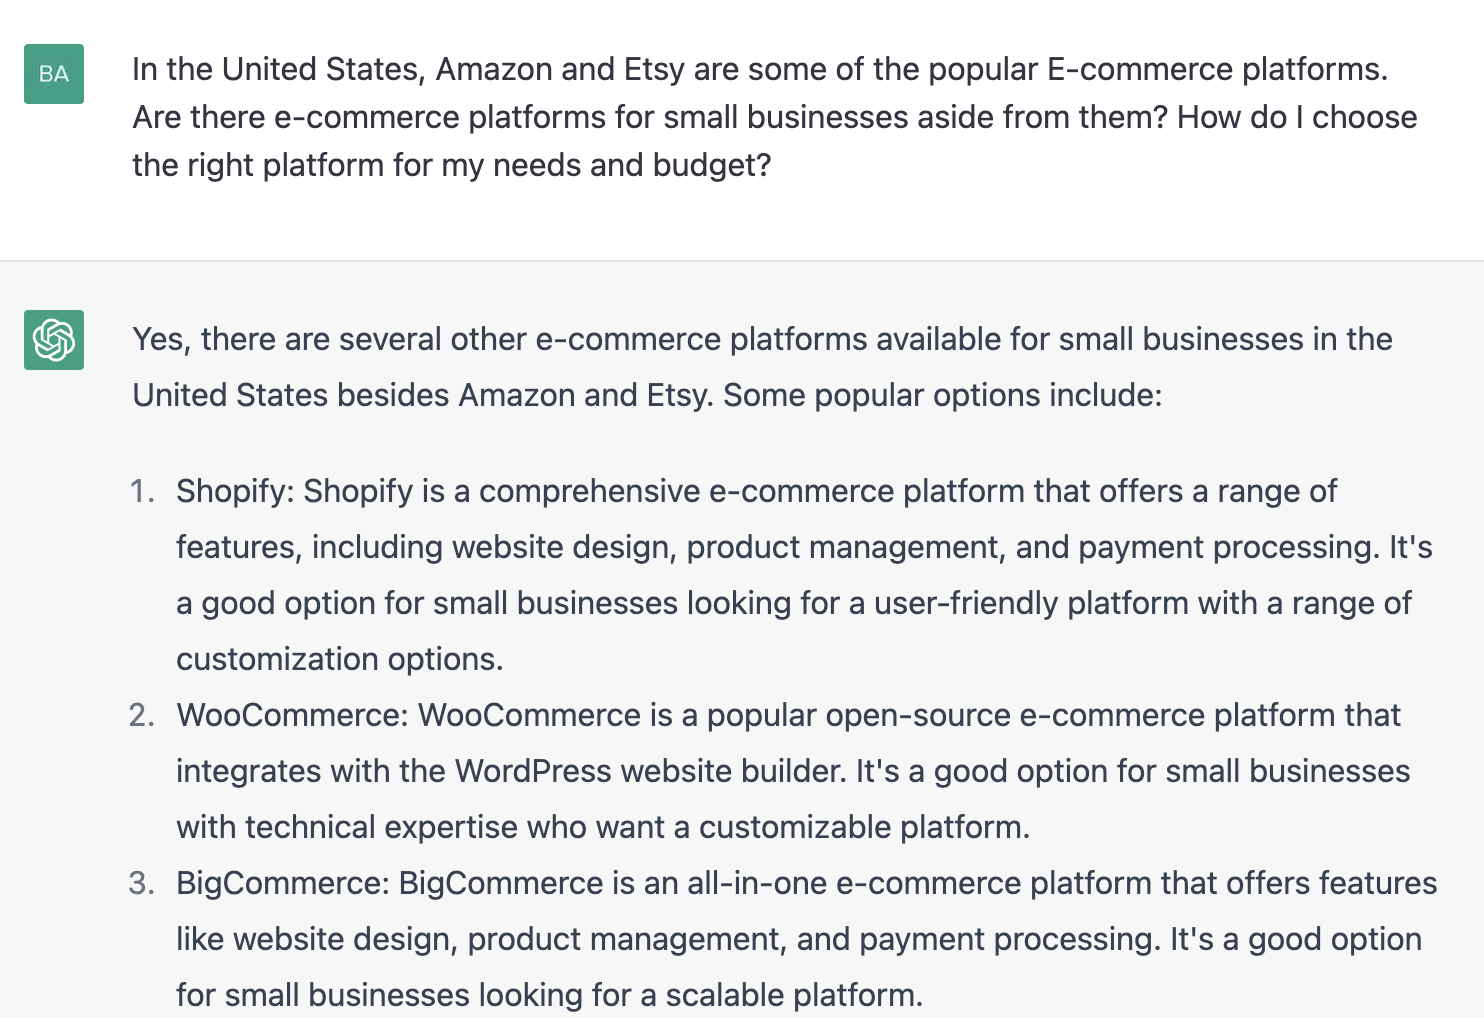 ChatGPT prompt about choosing platform for the needs and budget of a small business 